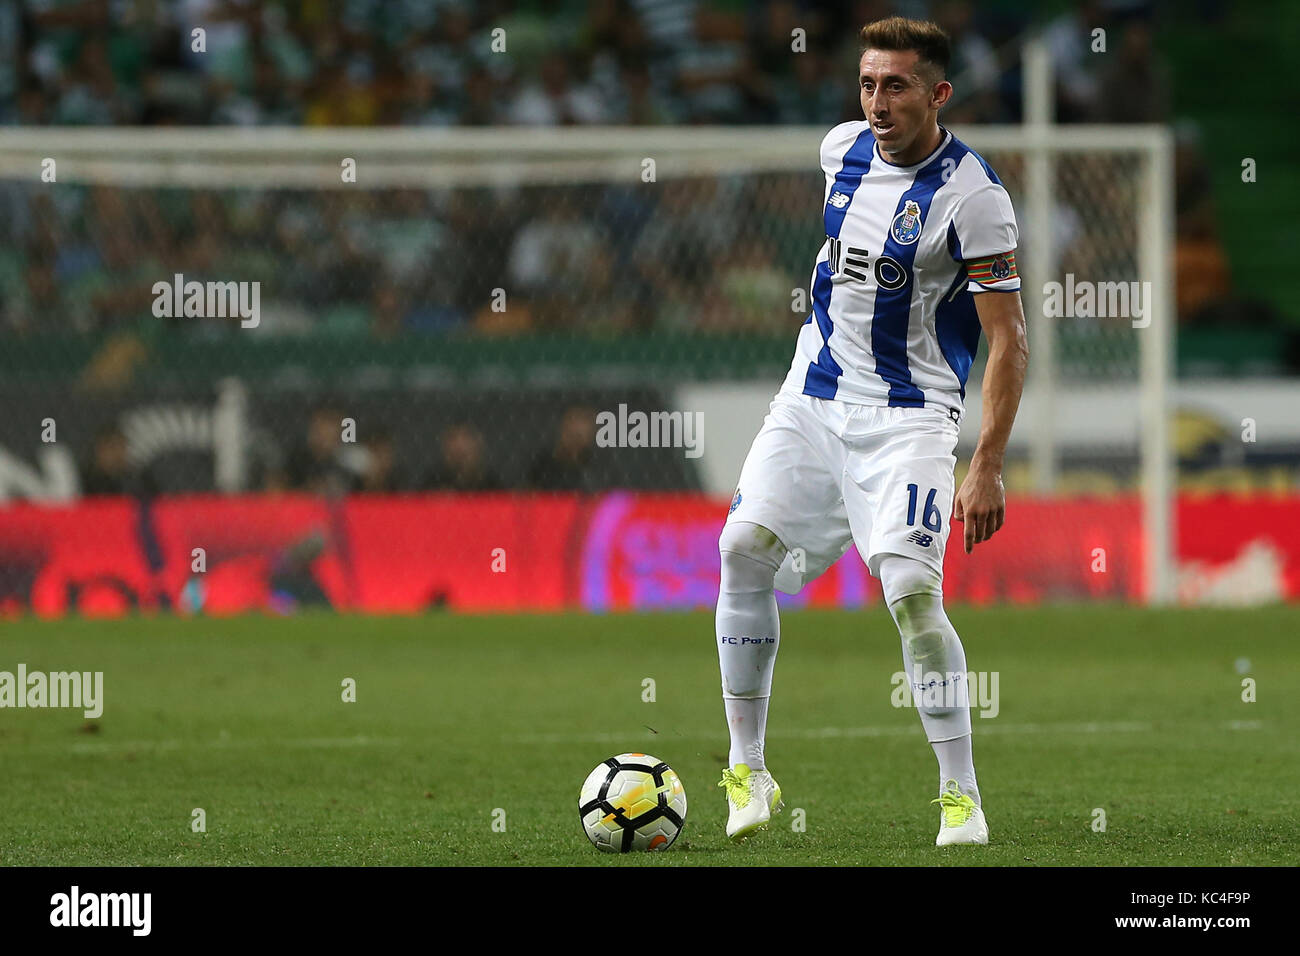 Lisbon, Portugal. 01st Oct, 2017. FC PortoÕs midfielder Hector Herrera from Mexico  during Premier League 2017/18 match between Sporting CP and FC Porto, at Alvalade Stadium in Lisbon on October 1, 2017. (Photo by Bruno Barros / DPI) Credit: Bruno Barros/Alamy Live News Stock Photo